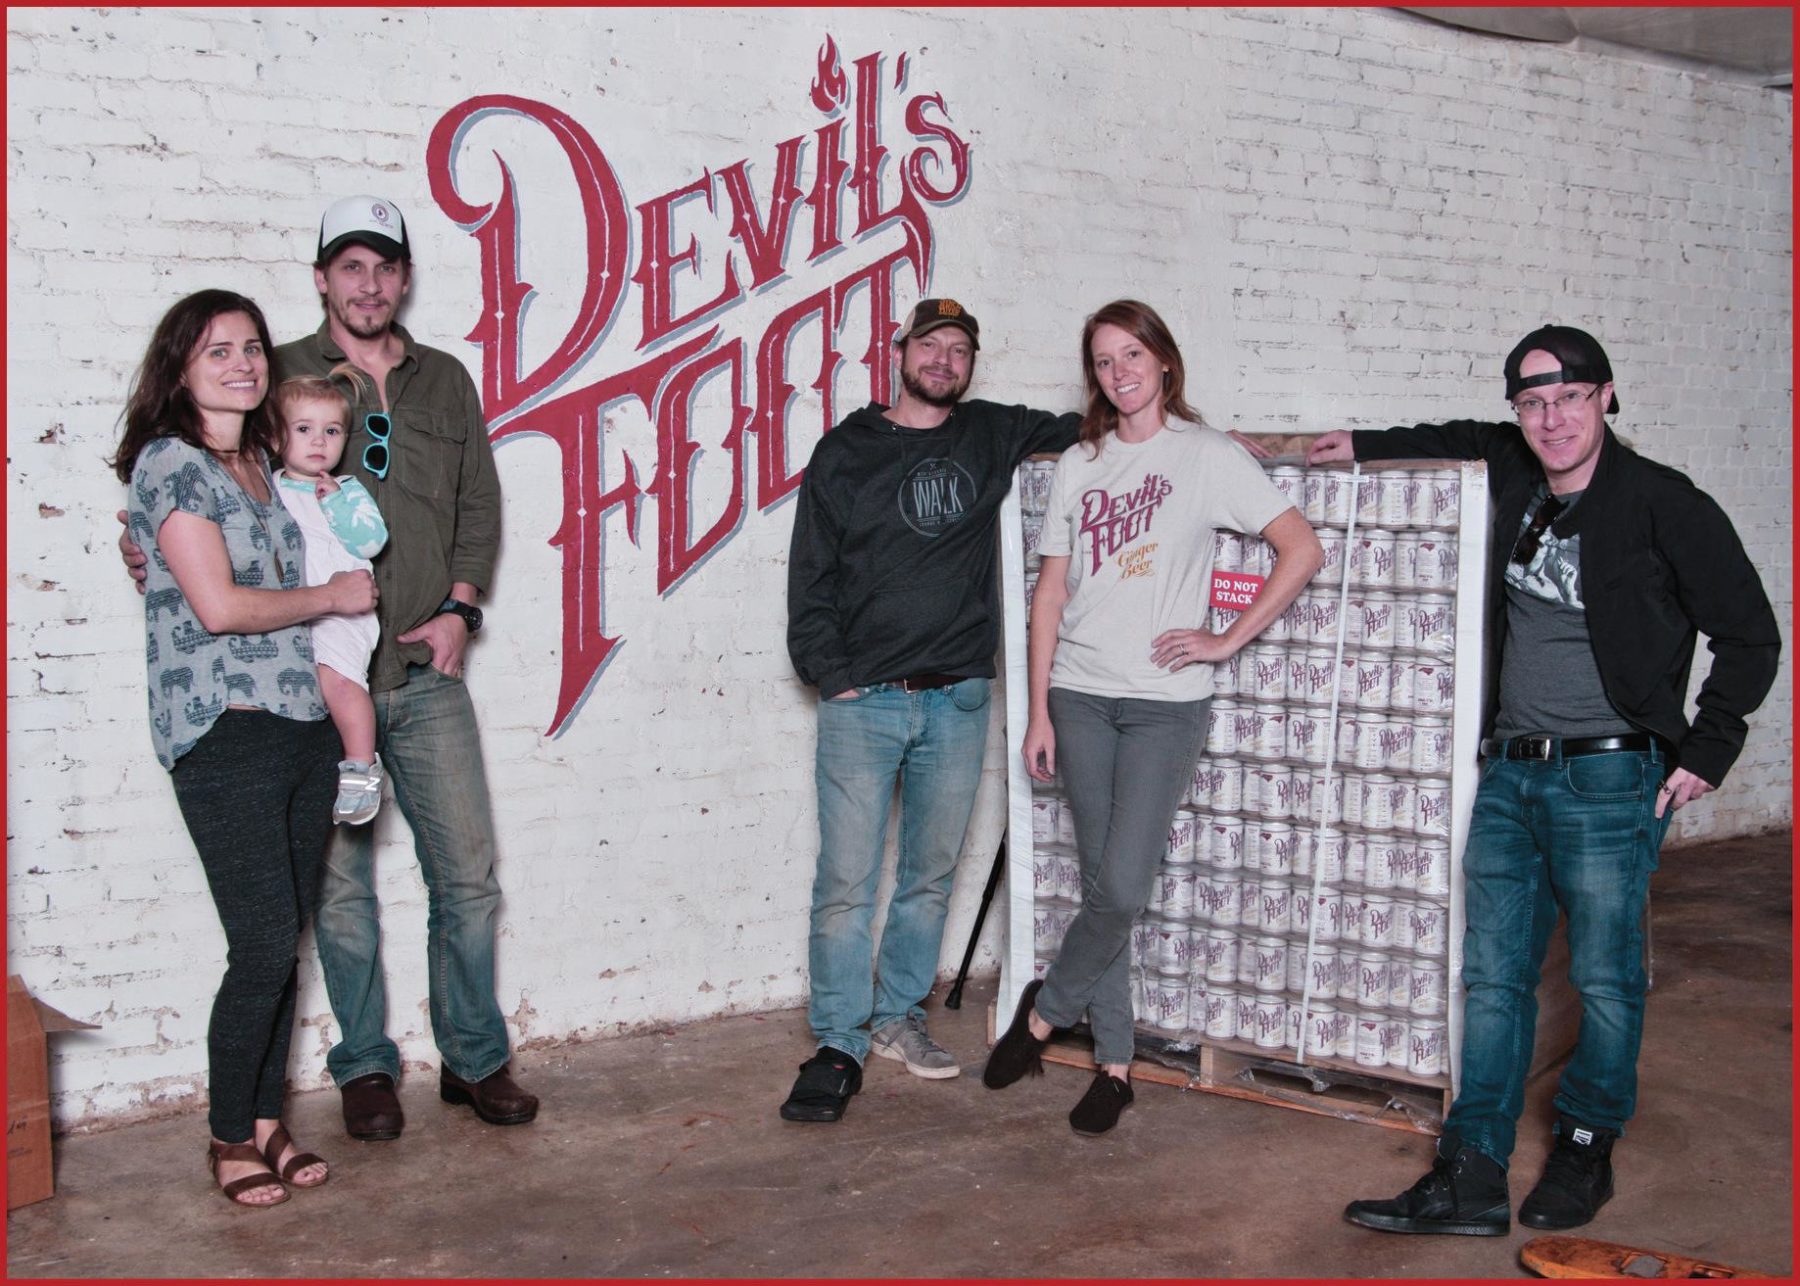 A group of people standing in a warehouse with the word's Devil's Foot spraypainted on the wall and a pallat of ginger beer cans. 